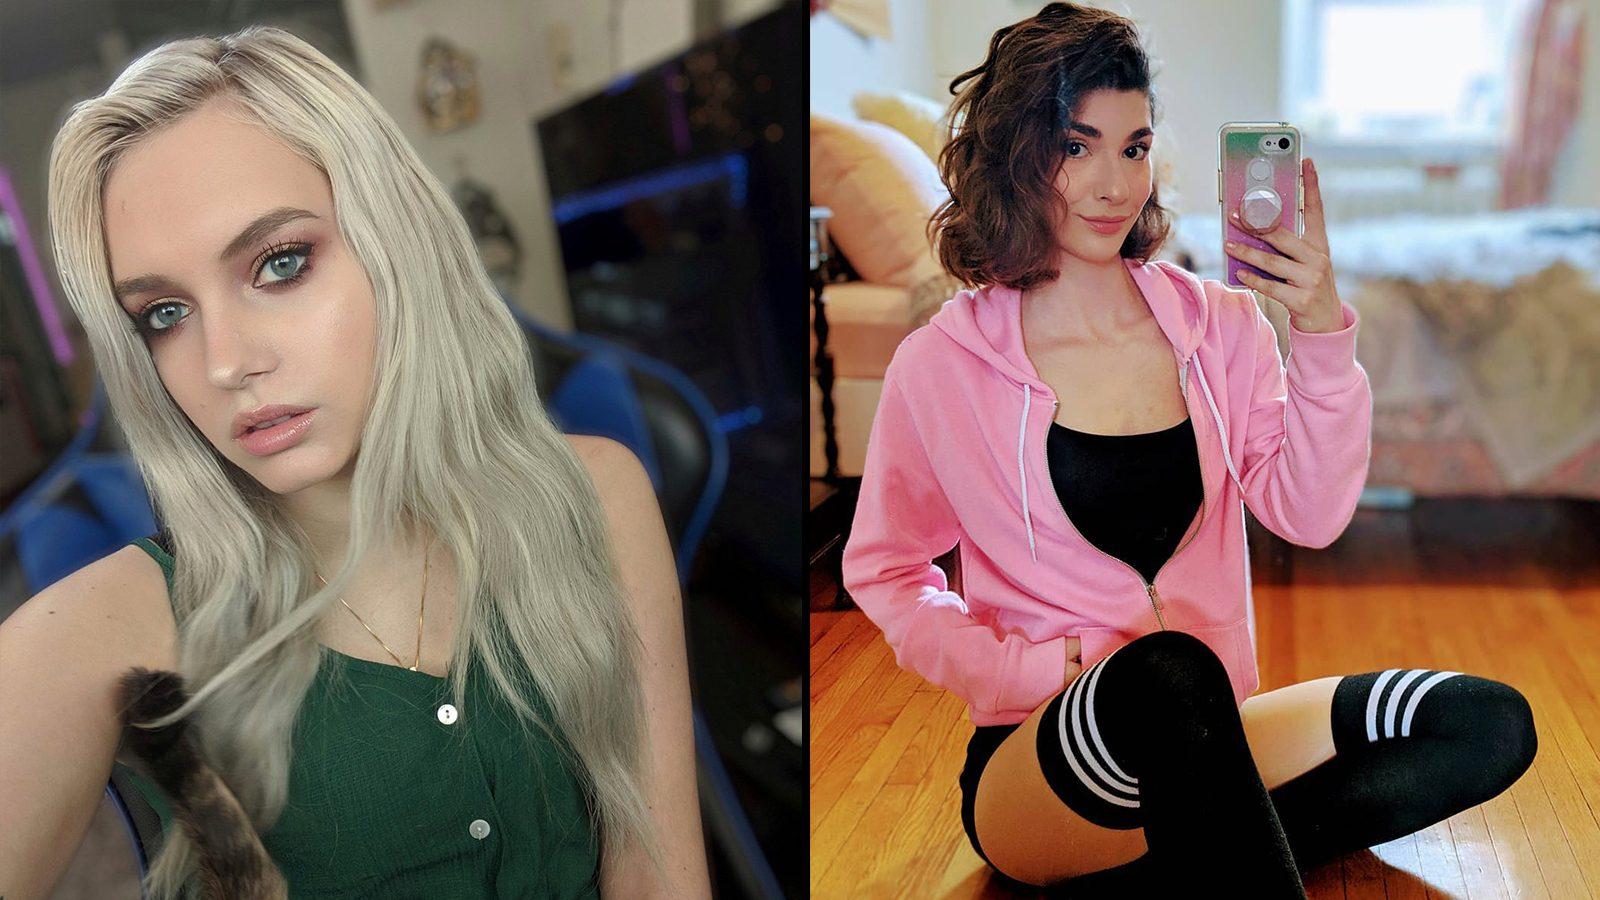 QTCinderella and crew booted from Instagram after streamer drama